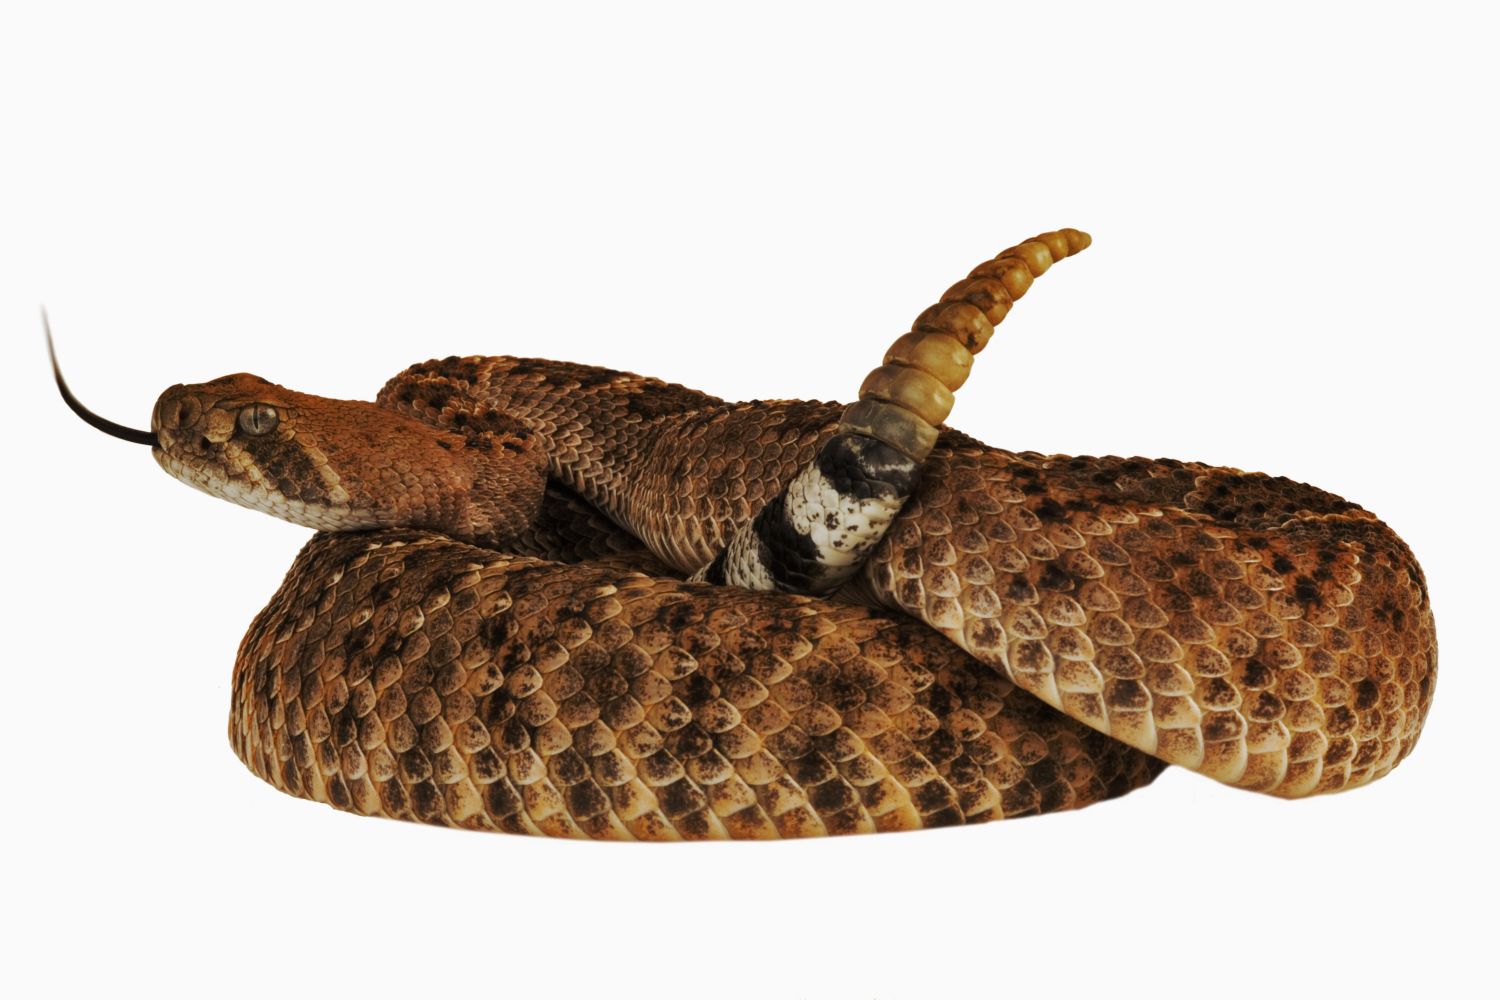 Is a Rattlesnake an Omnivore?